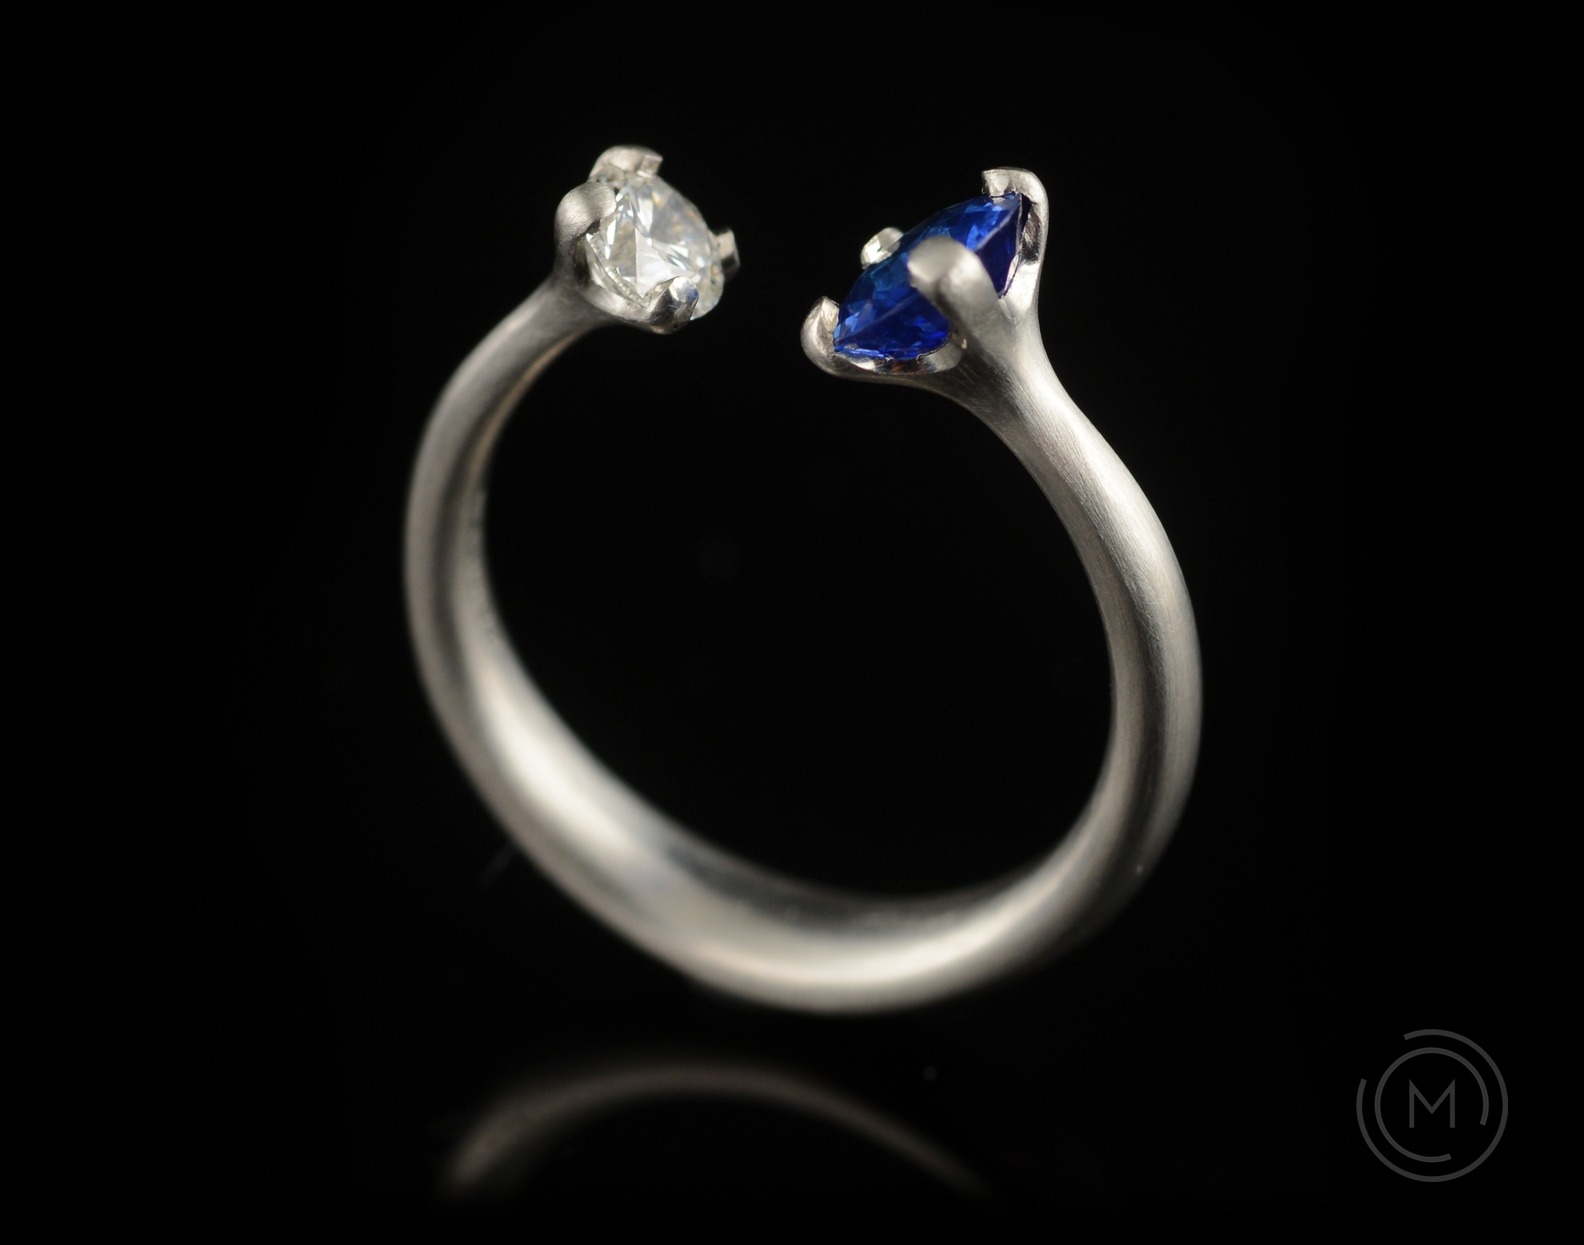 Contemporary engagement ring with two stones - diamond and sapphire